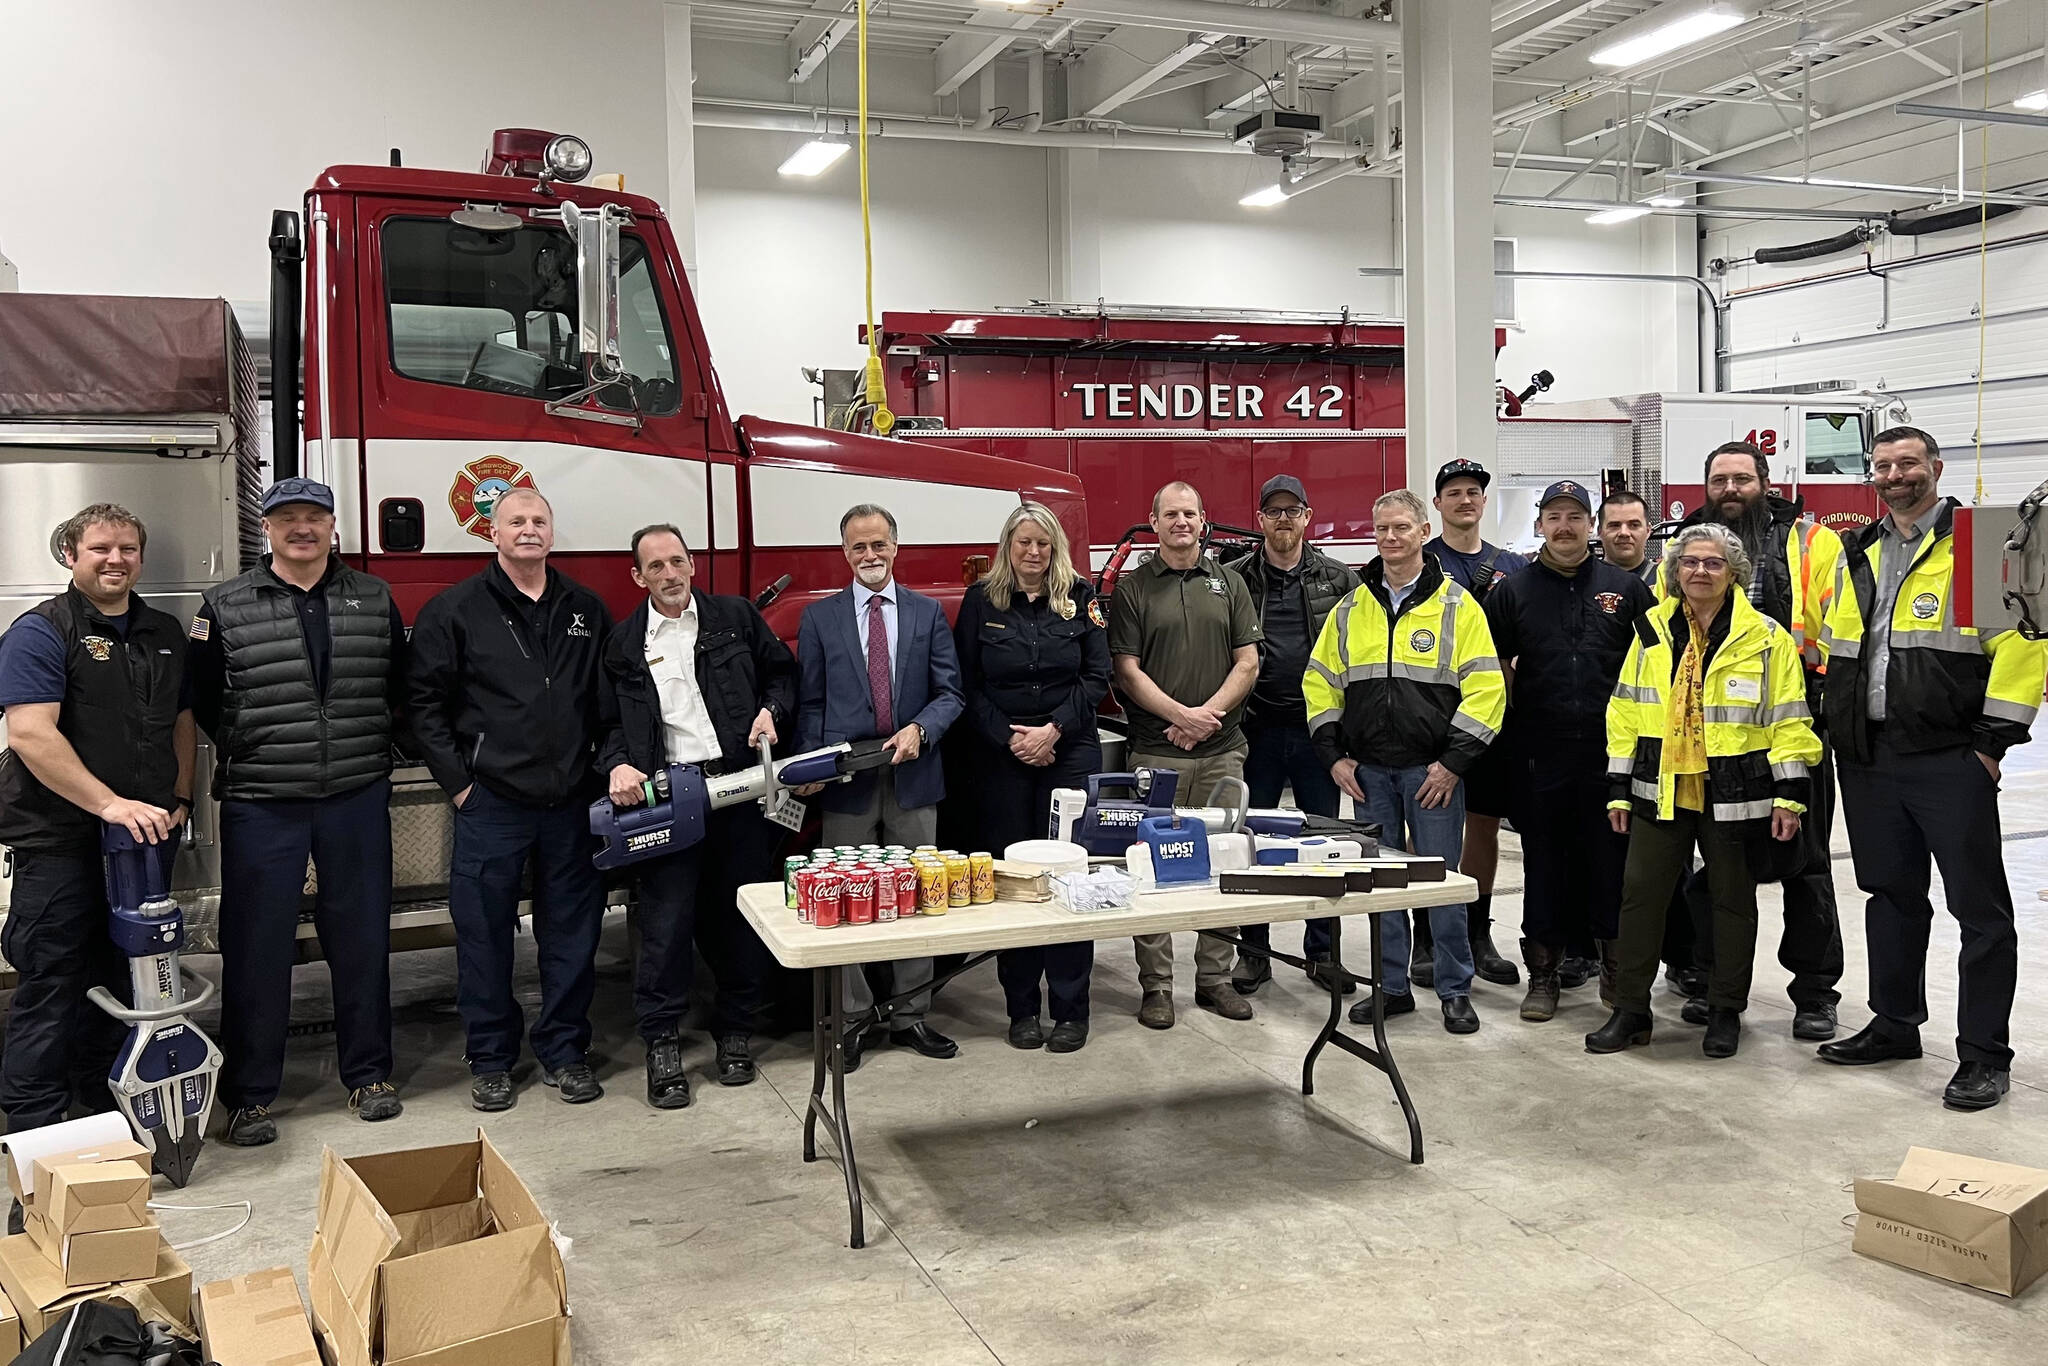 Kenai Peninsula Borough Mayor Peter Micciche (fifth from left) celebrates the receipt of extrication equipment alongside staff from Kenai Peninsula fire departments and the Girdwood Fire Department during a press event at the Girdwood Fire Department on Tuesday, April 25, 2023, in Girdwood, Alaska. (Photo courtesy Kenai Peninsula Borough Mayor’s Office)